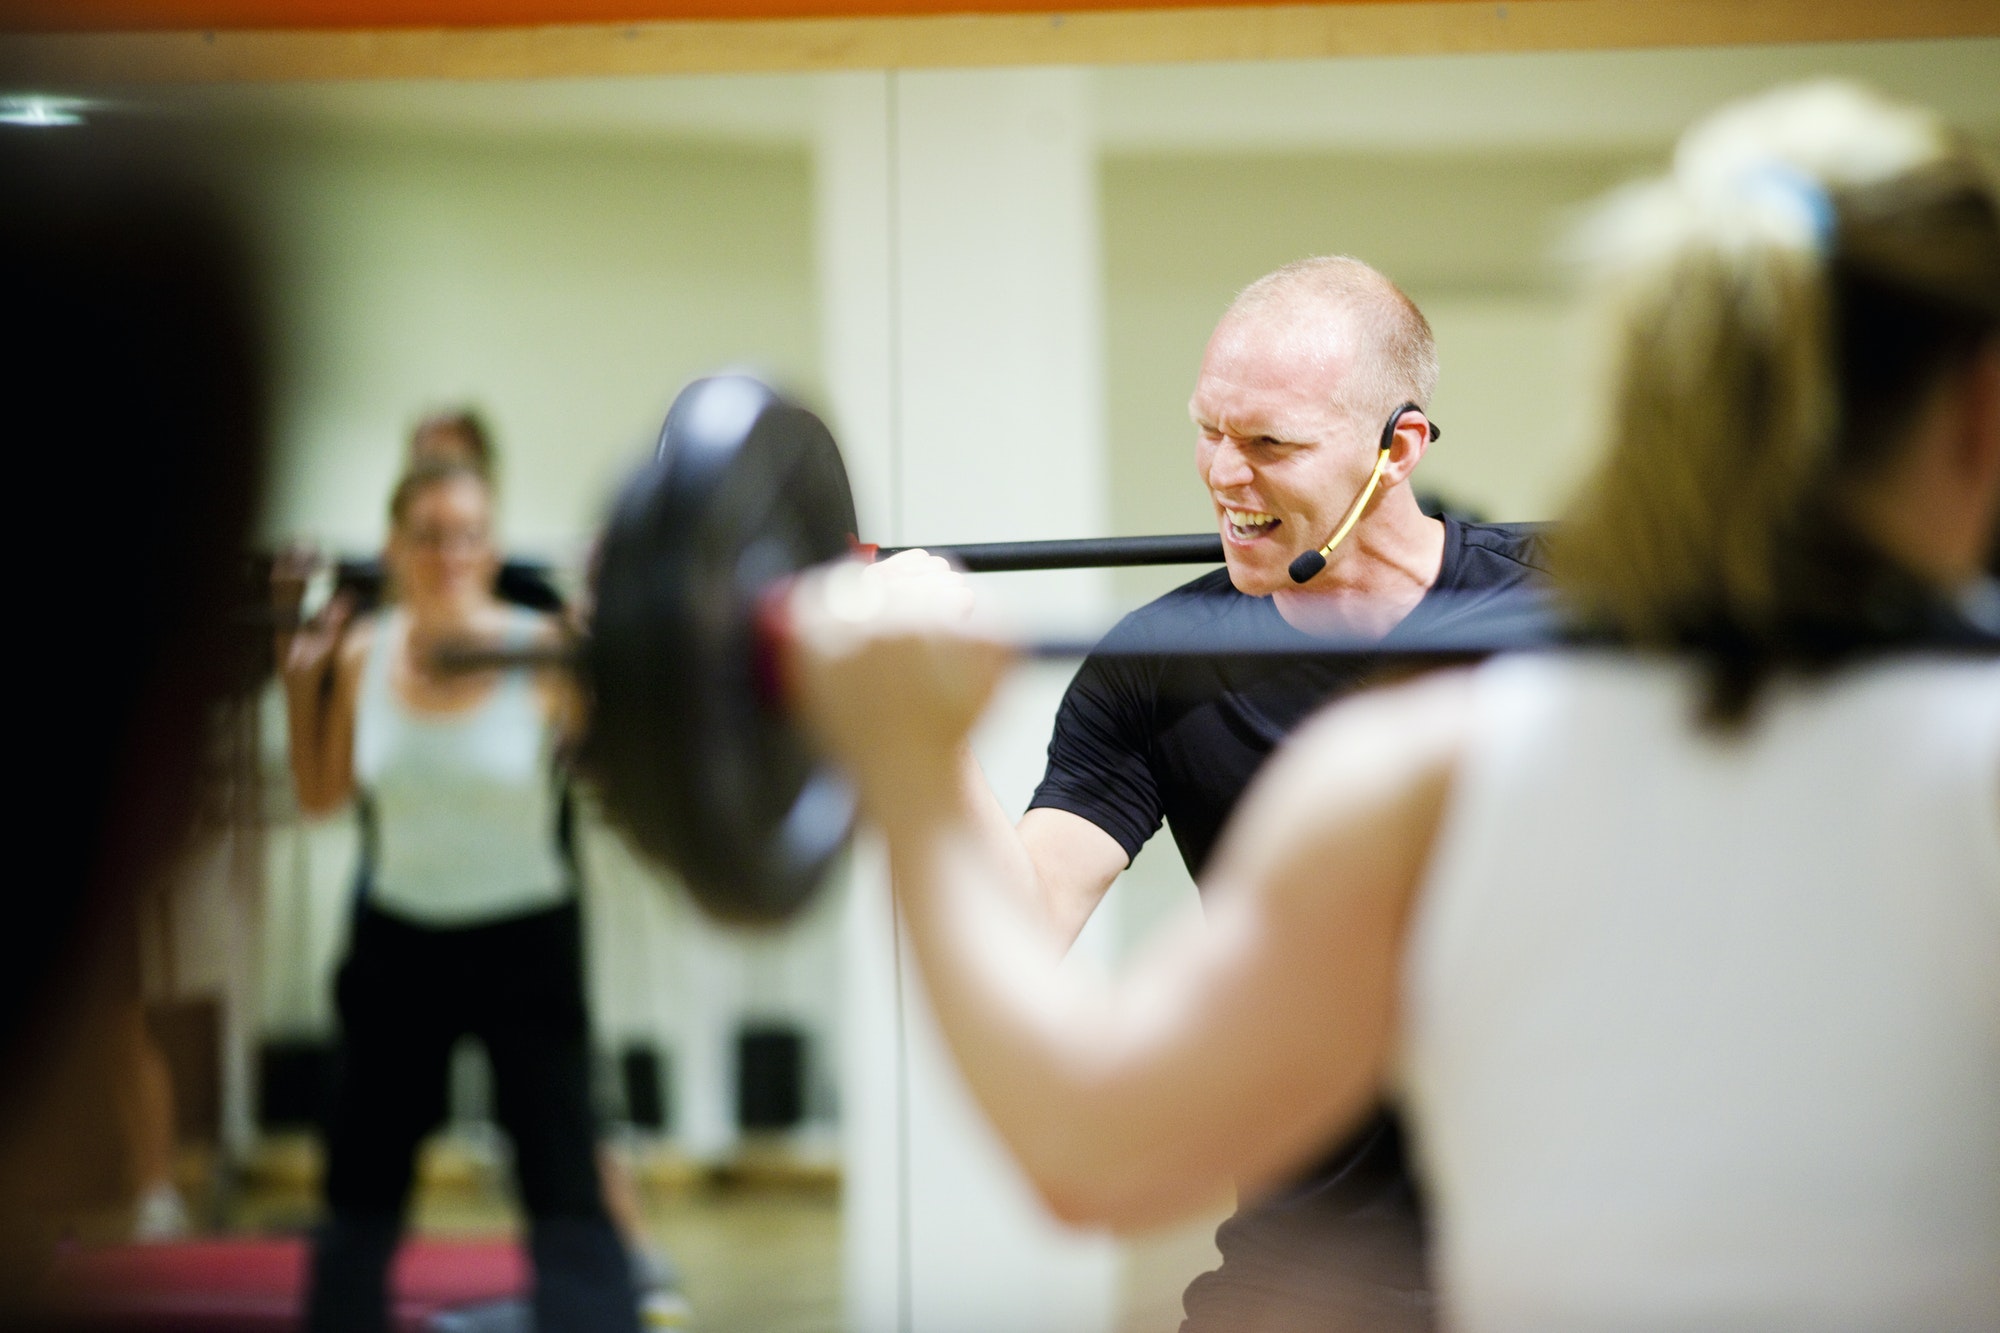 Cheerful instructor lifting barbell in class at gym